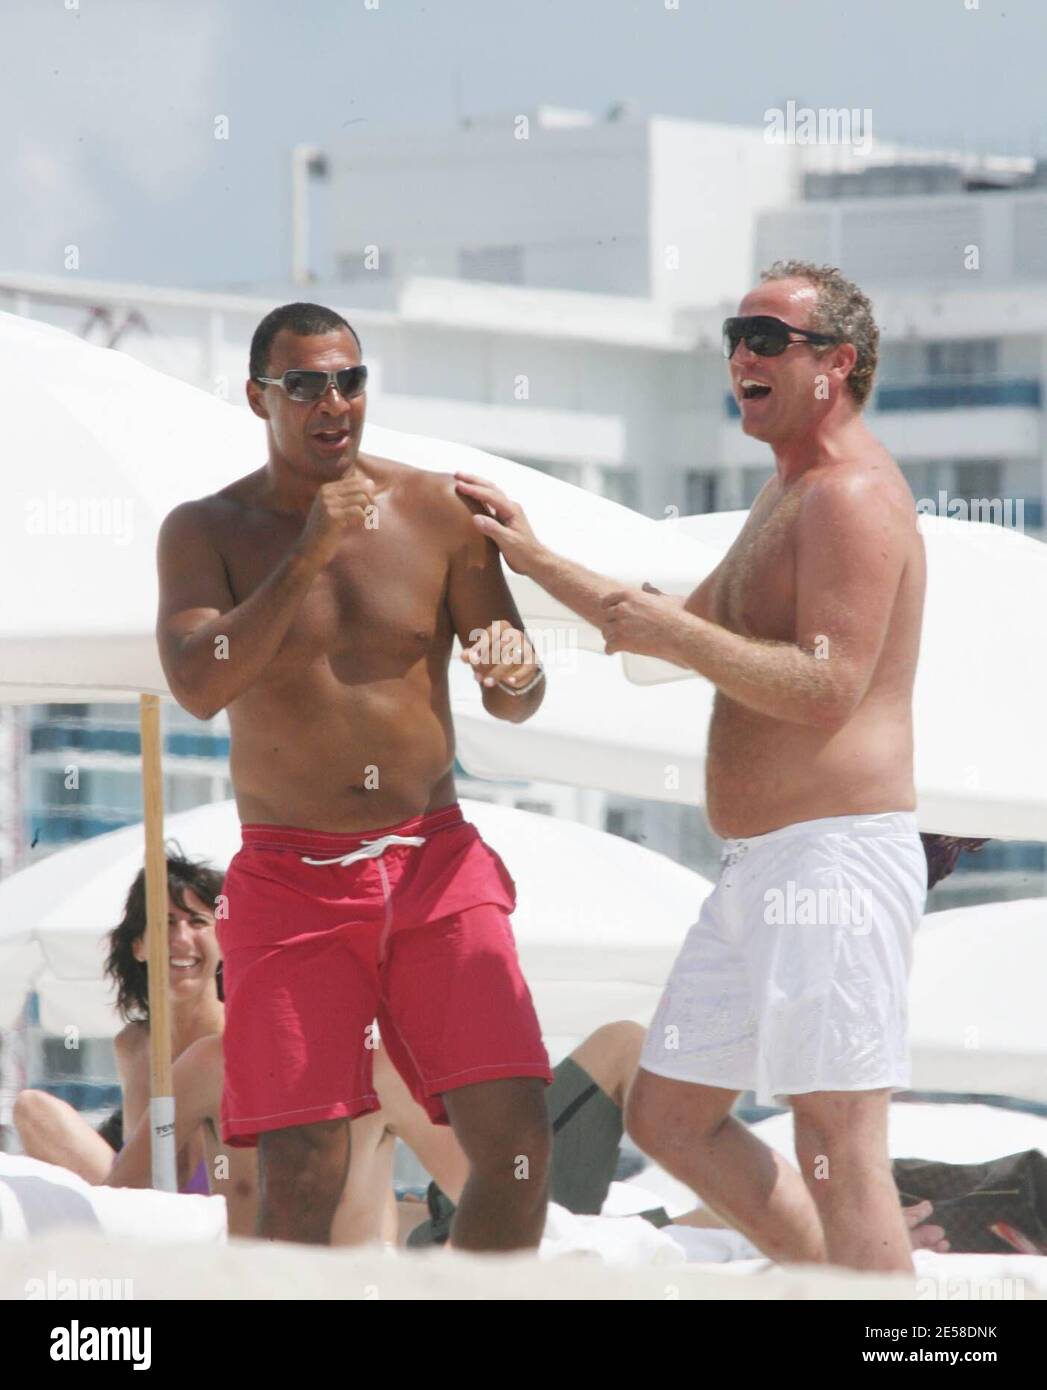 Exclusive!! Dutch soccer legend Ruud Gullit spends a day with family and  friends on Miami Beach, Fla. 7/21/07. [[mab]] Stock Photo - Alamy